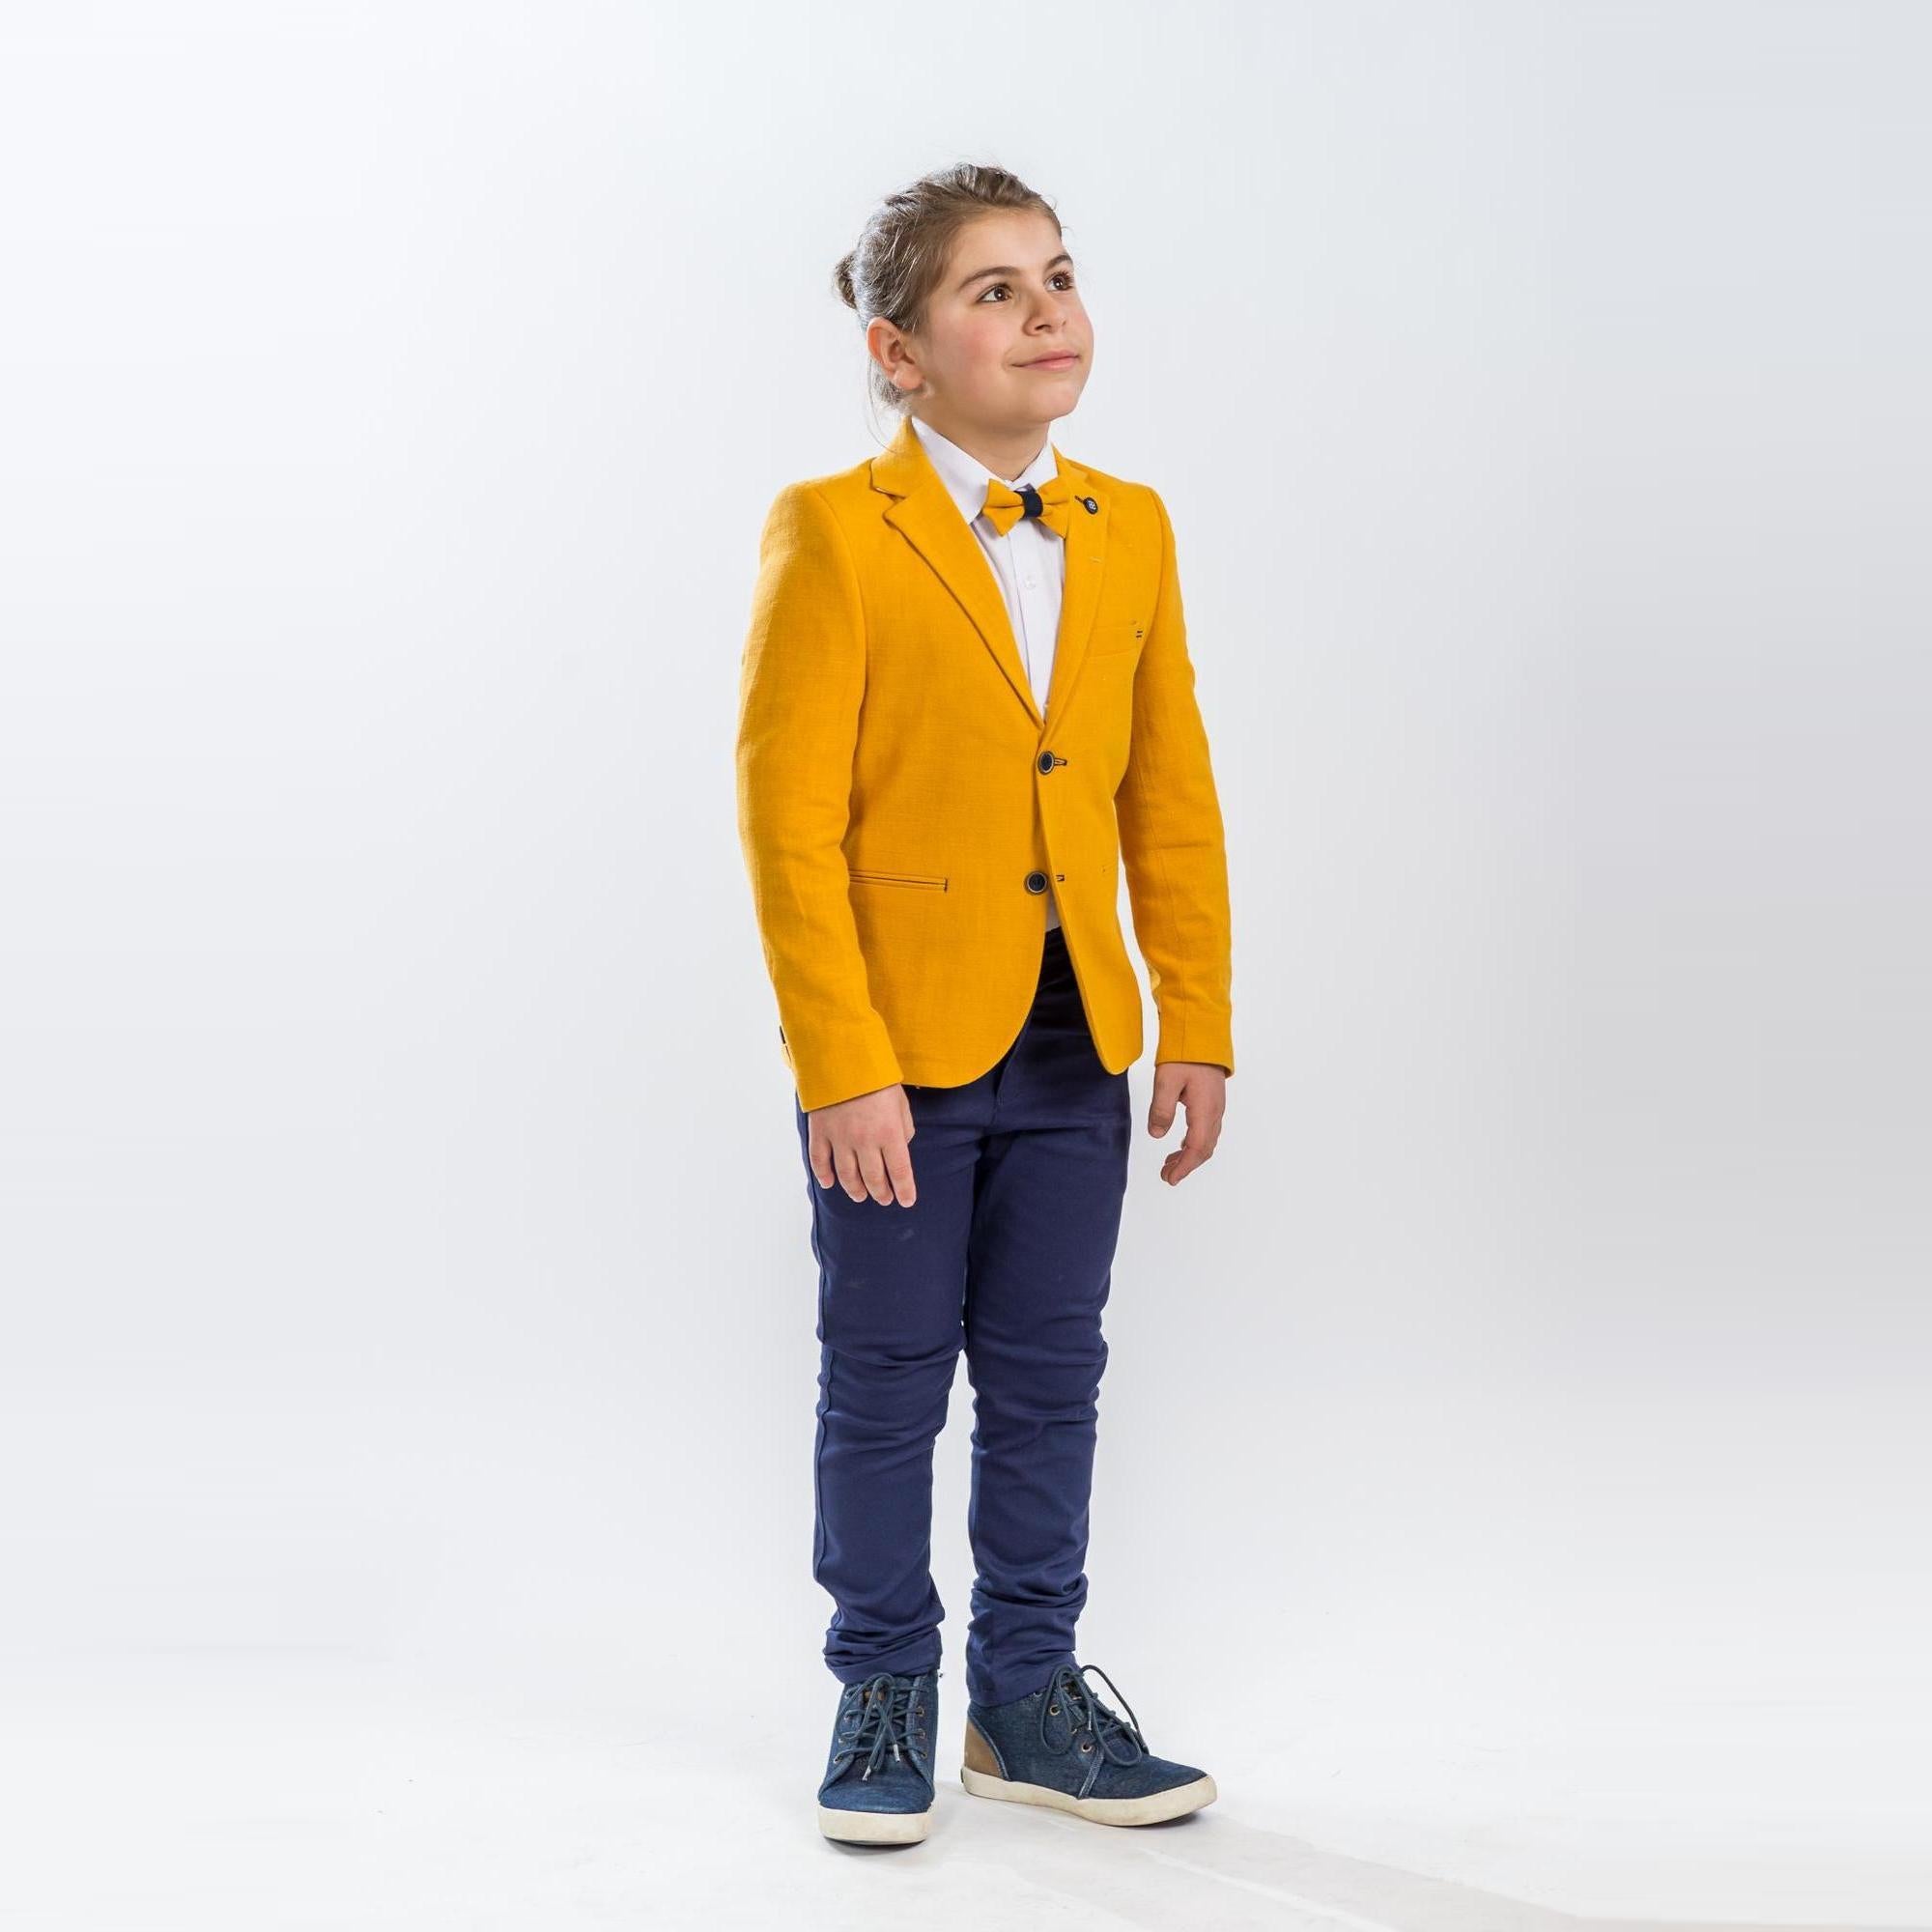 Tycoon Life Formal Boys Suit